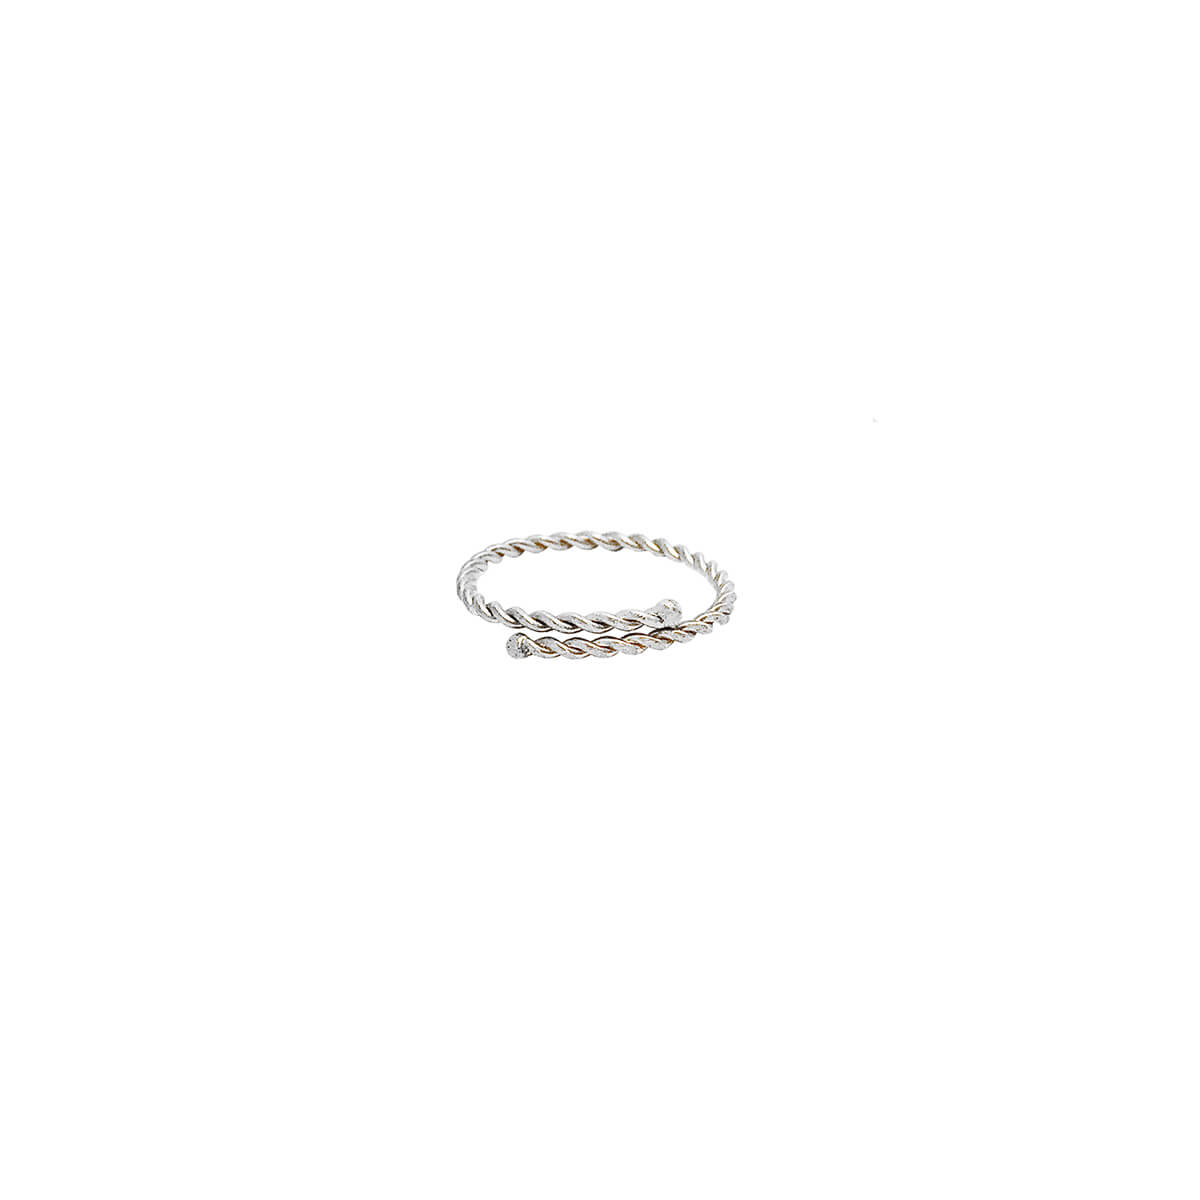 Photo of the silver Twisted Stacking Ring, on a white background.